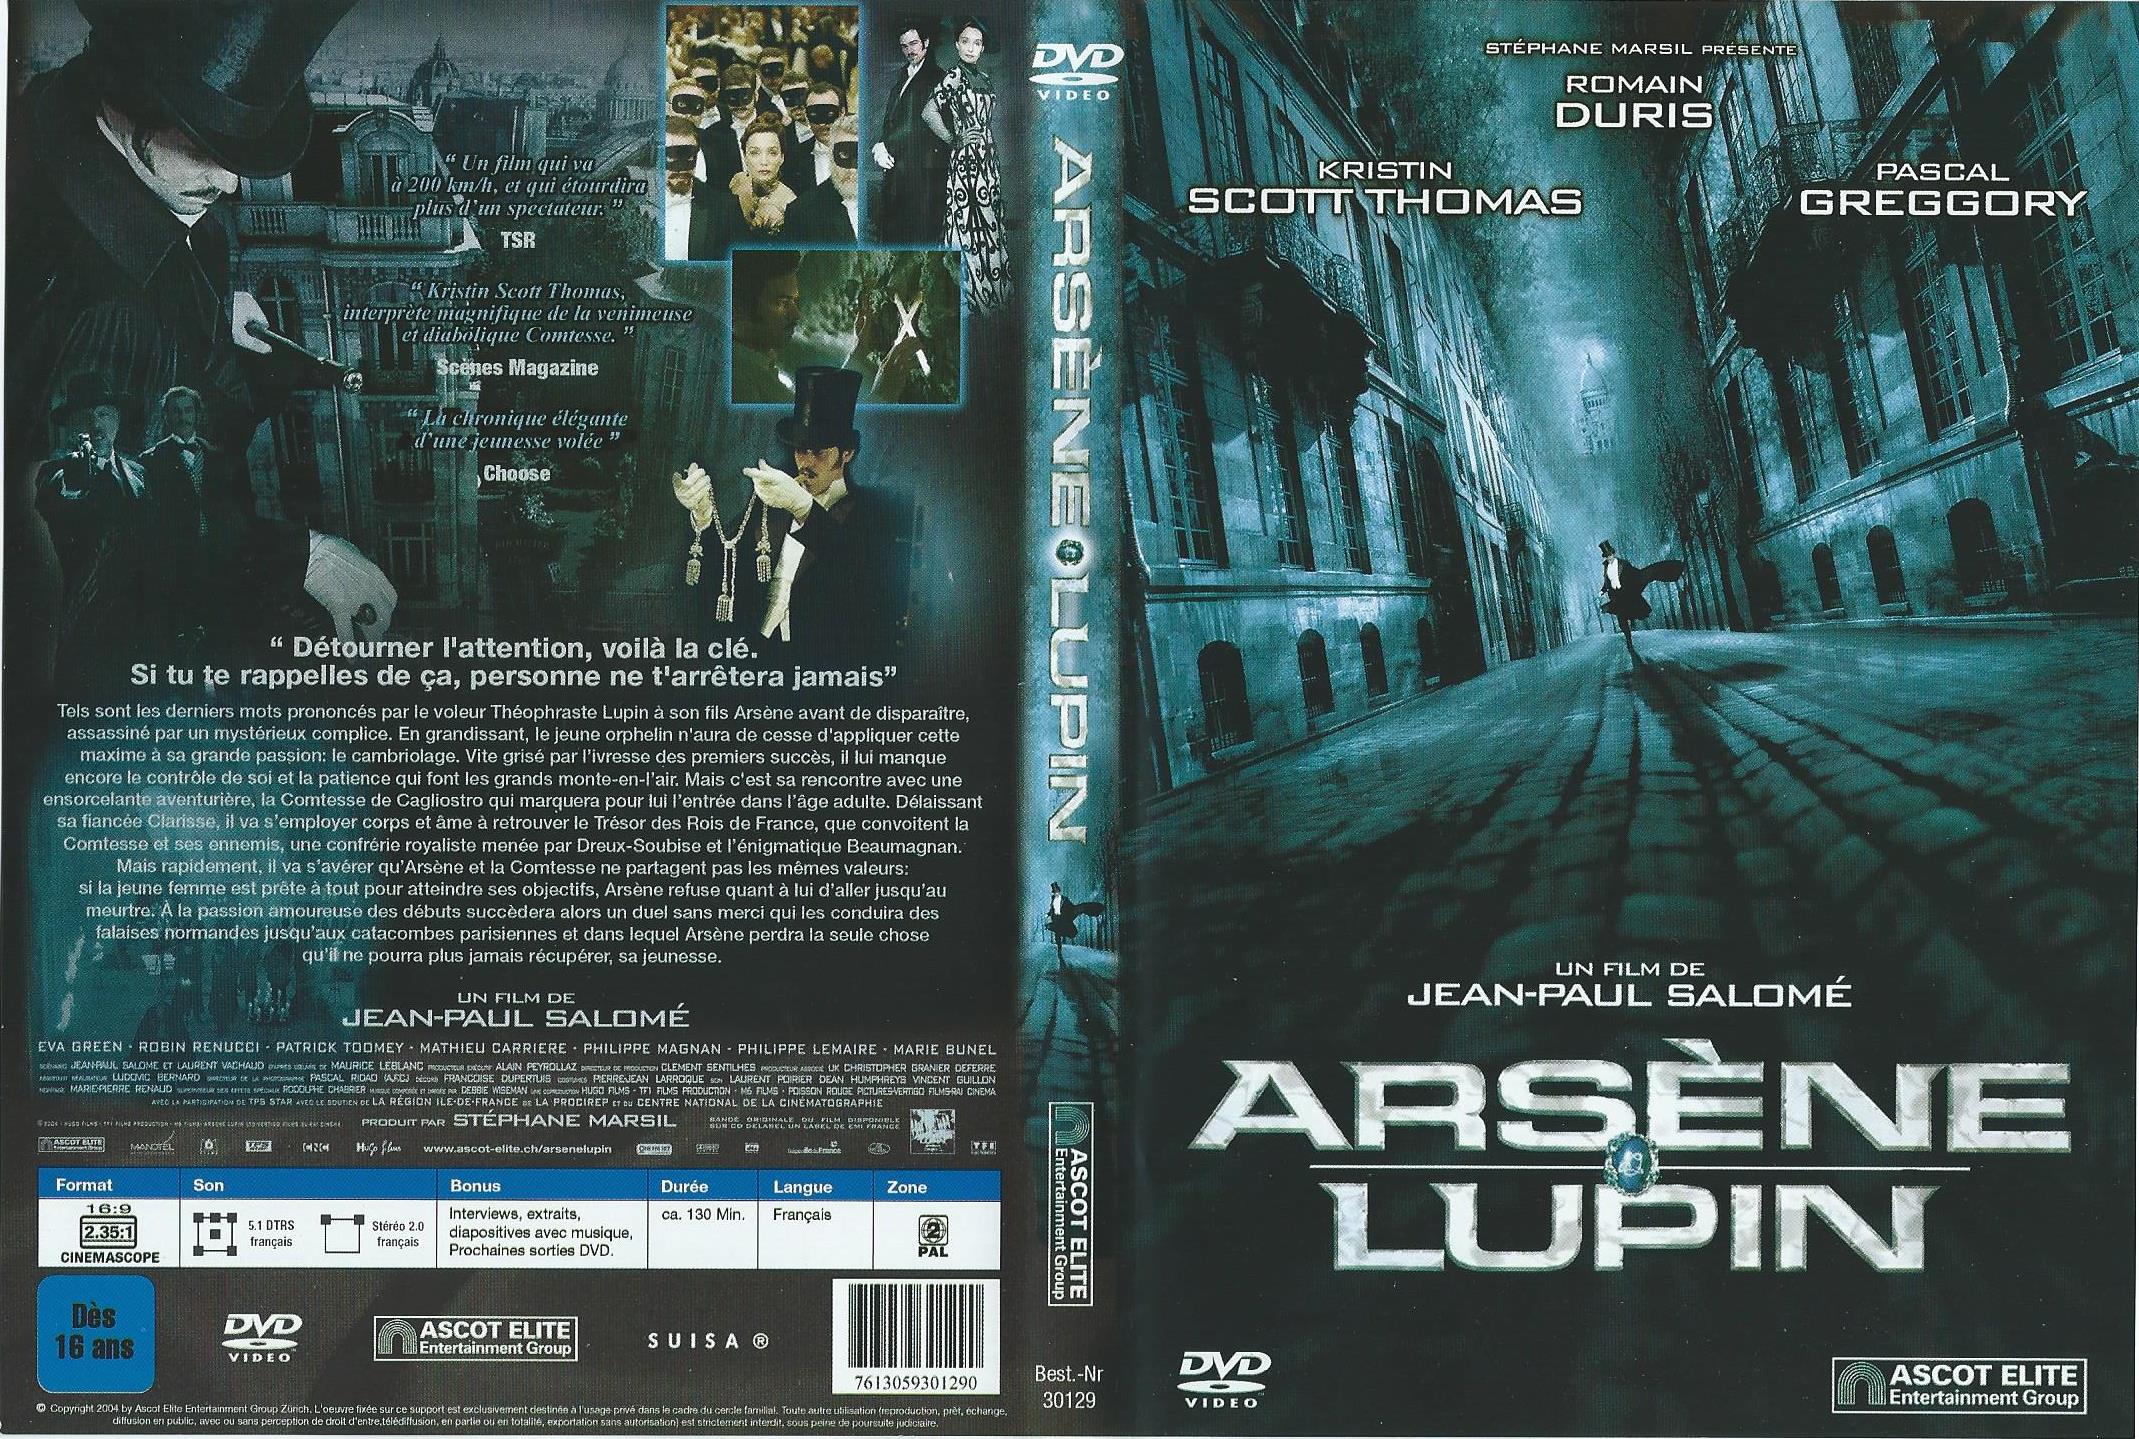 Jaquette DVD Arsne Lupin v2